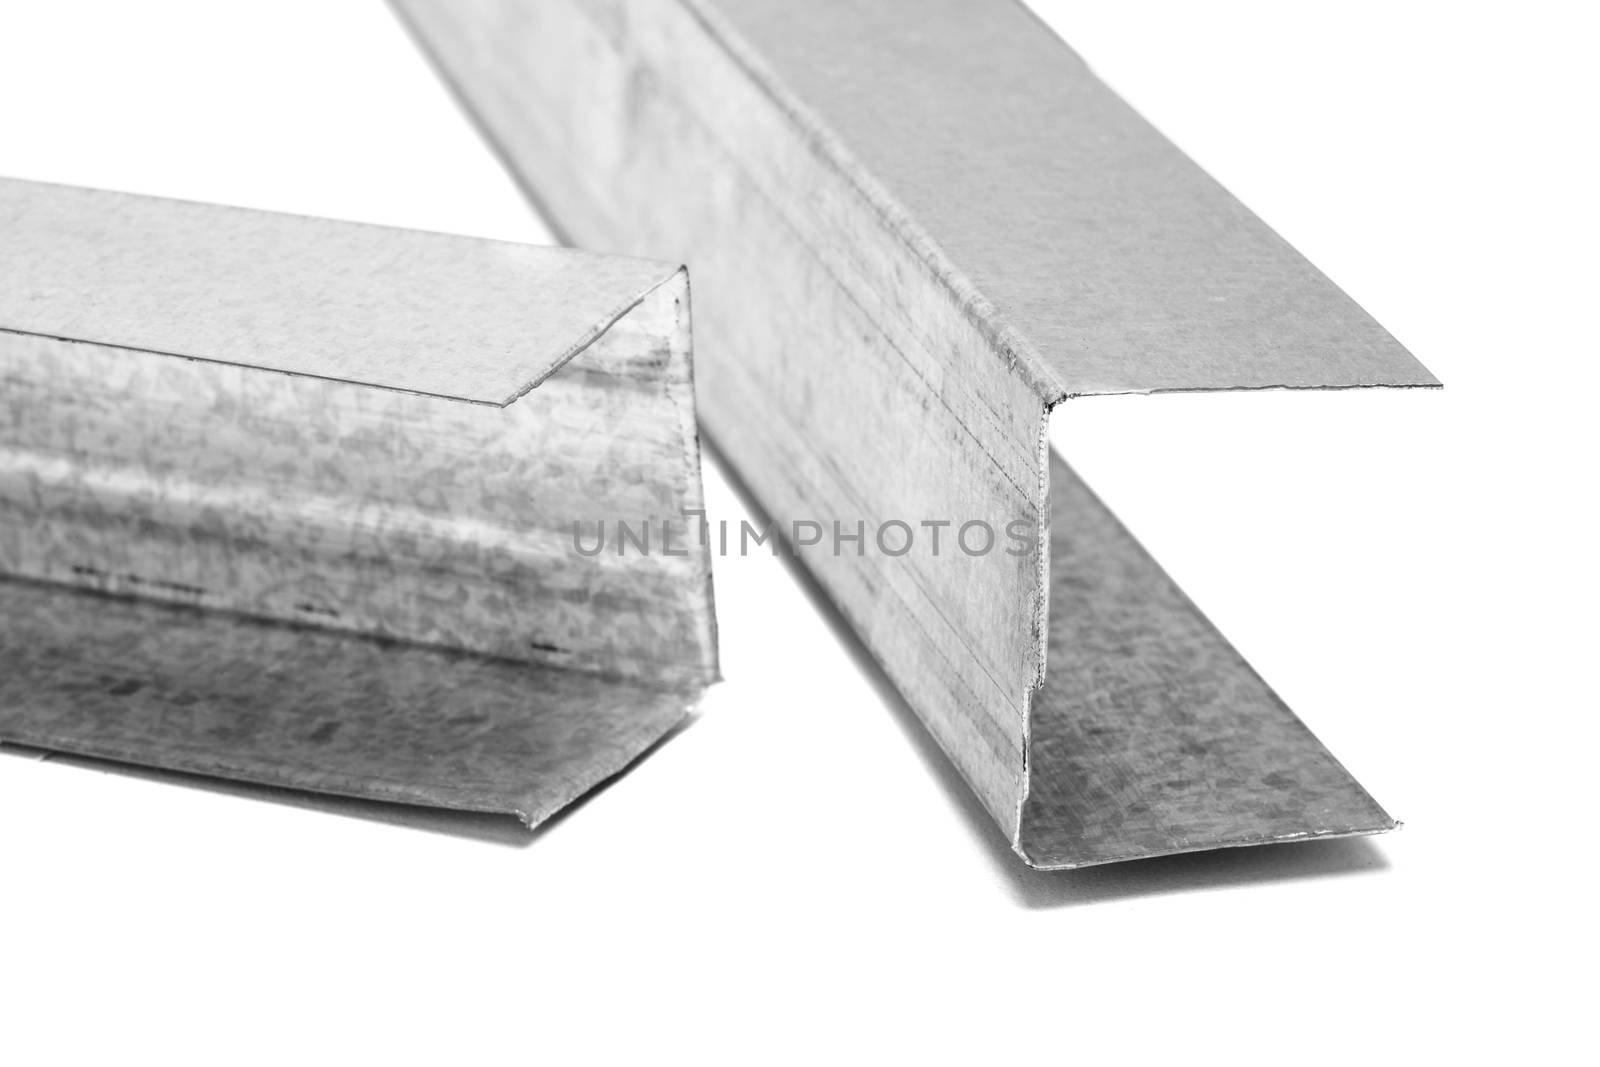 U shaped metal profile for drywall support isolated on white background